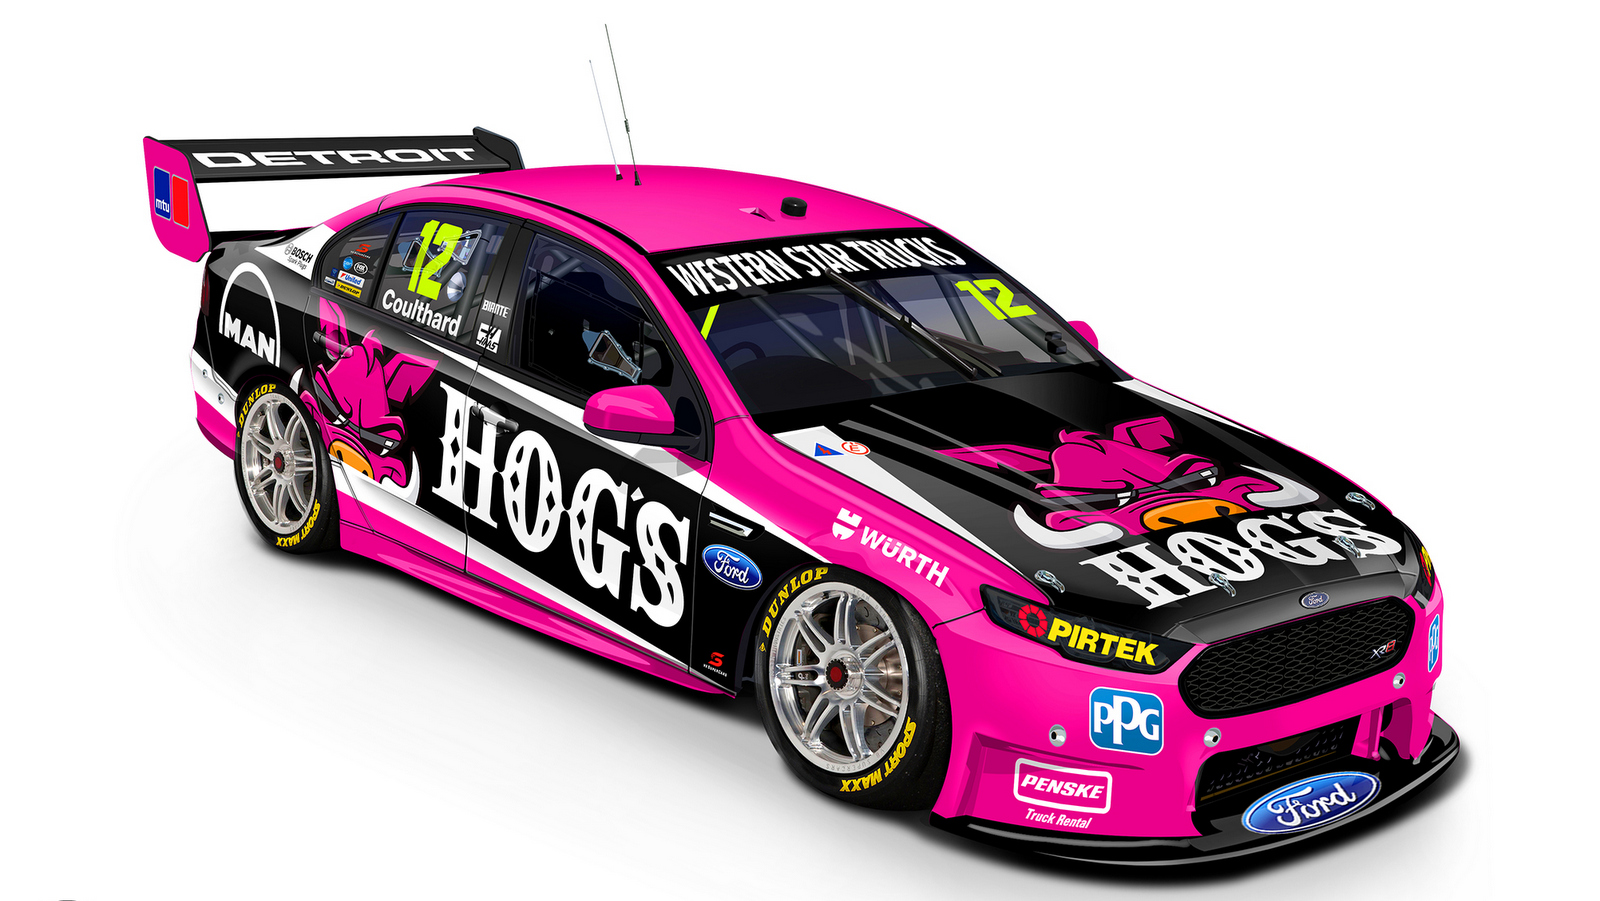 Coulthard goes pink for Townsville